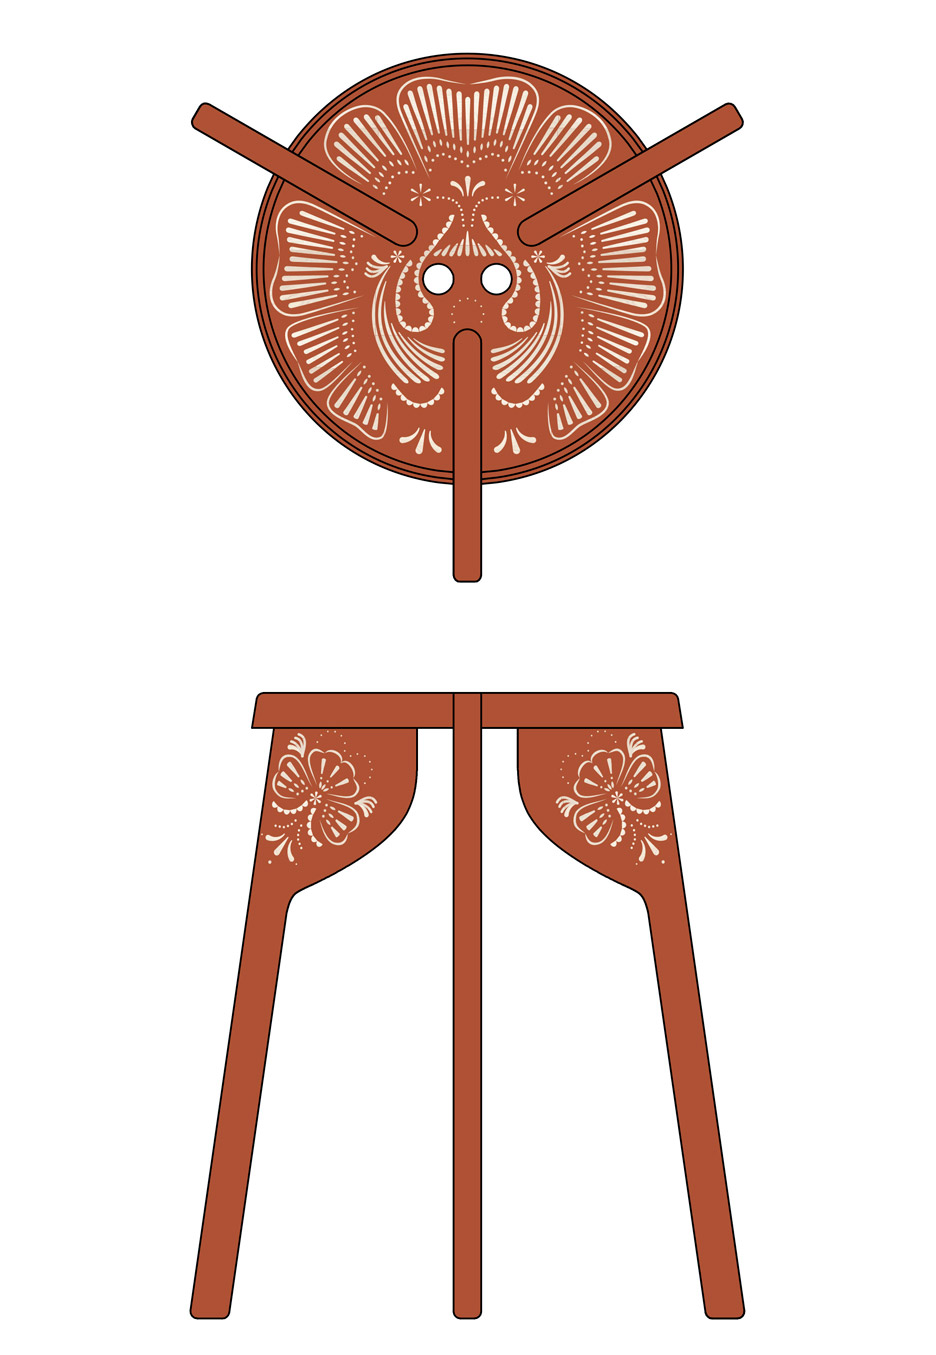 Wingårdhs' Tattoo stool is decorated with wood carvings